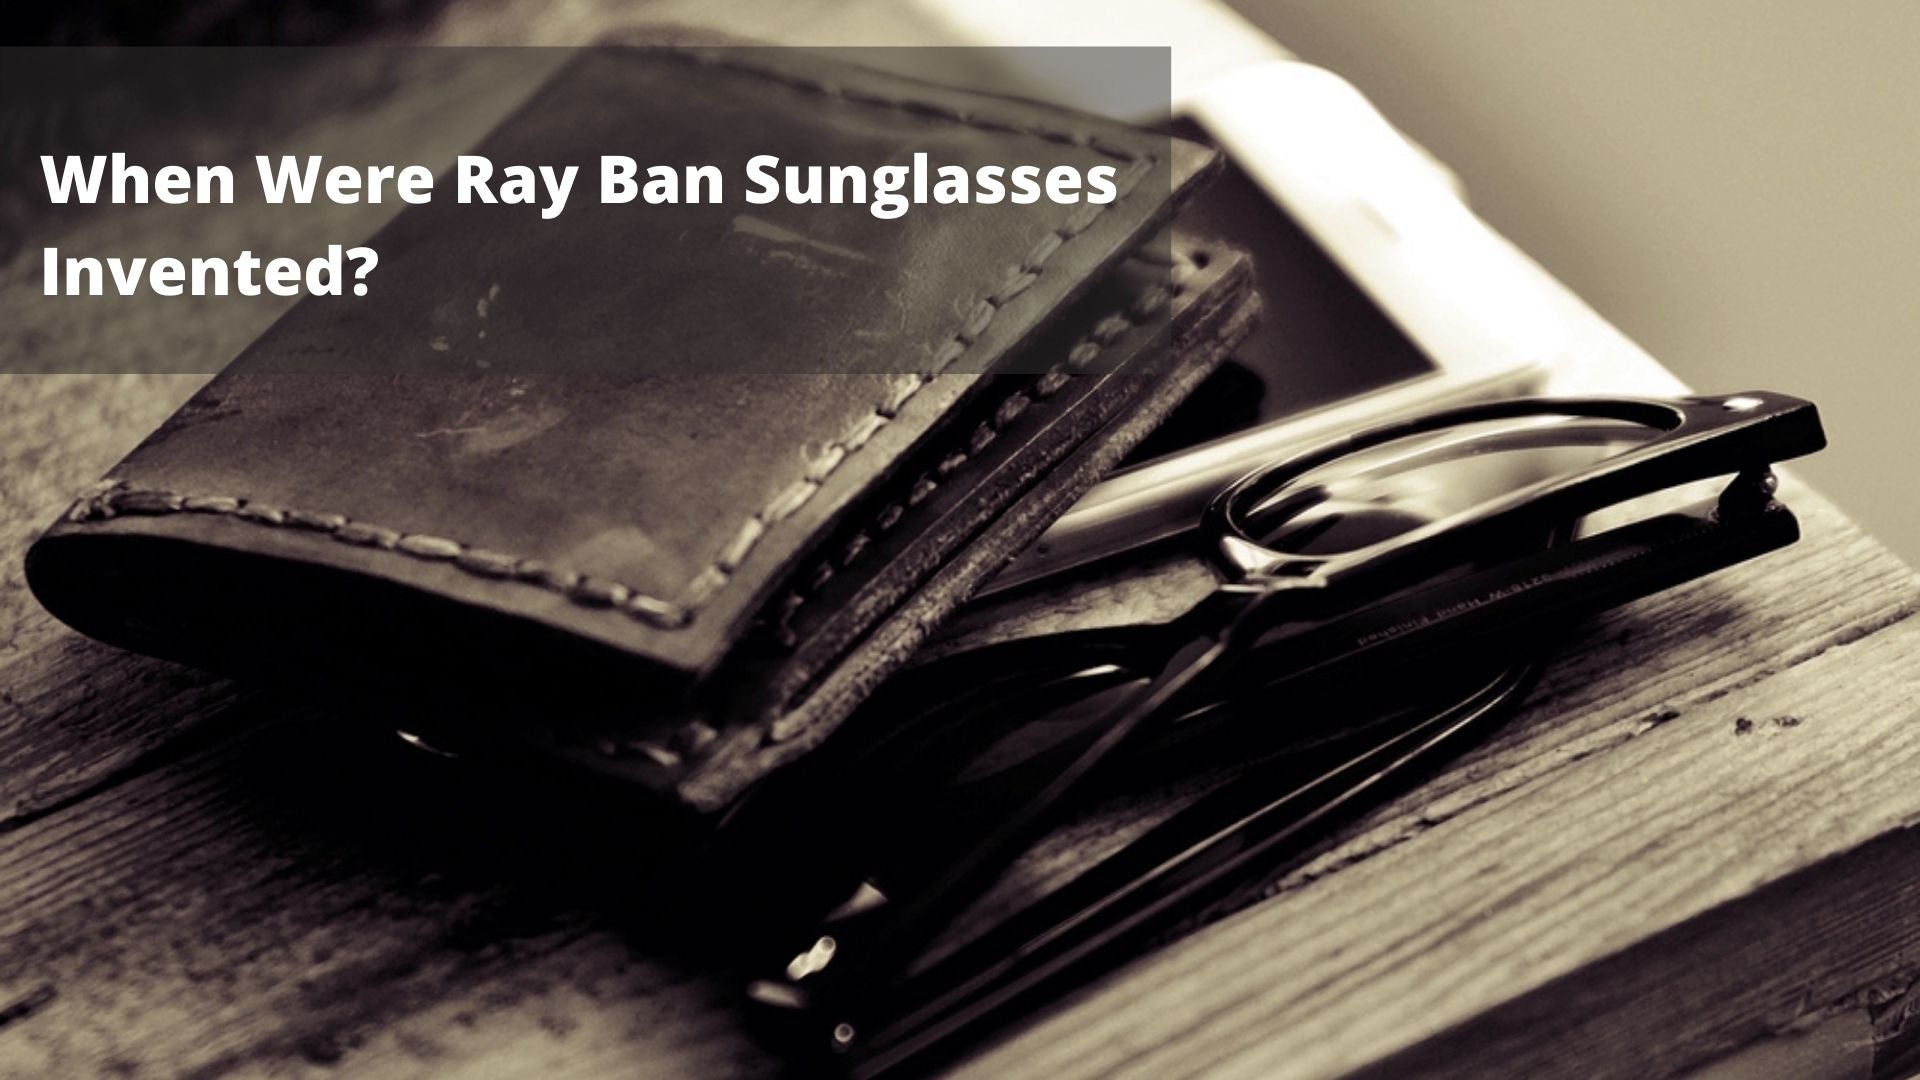 When Were Ray Ban Sunglasses Invented